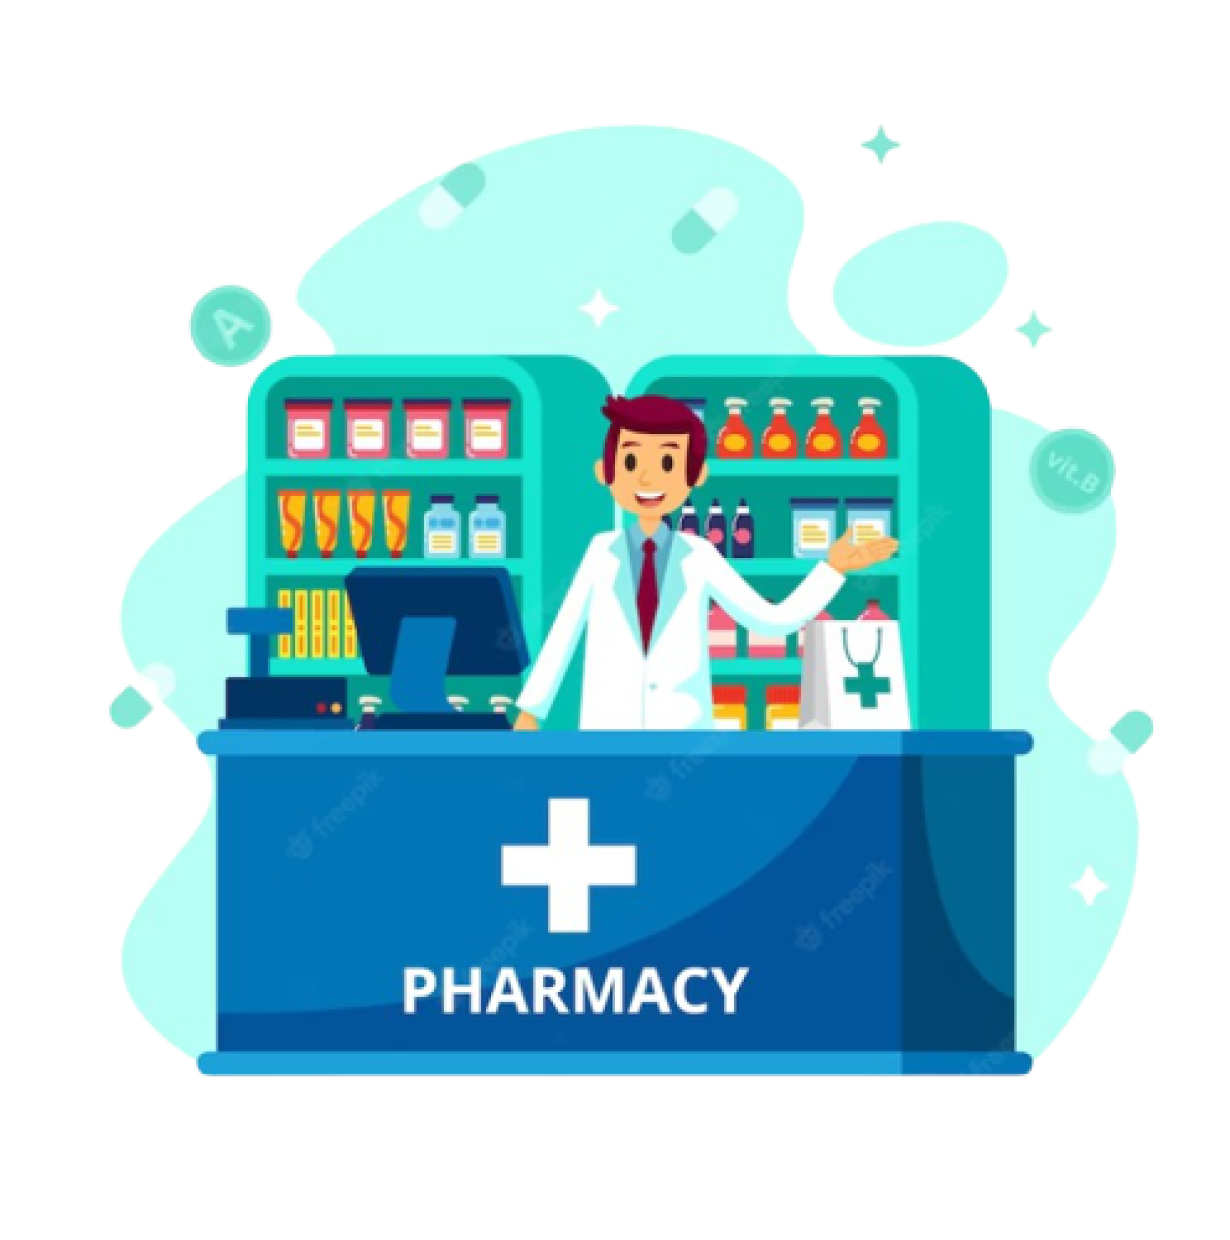 flat-pharmacist-attending-customers-background_23-2148170522-_1__cleanup-removebg-preview